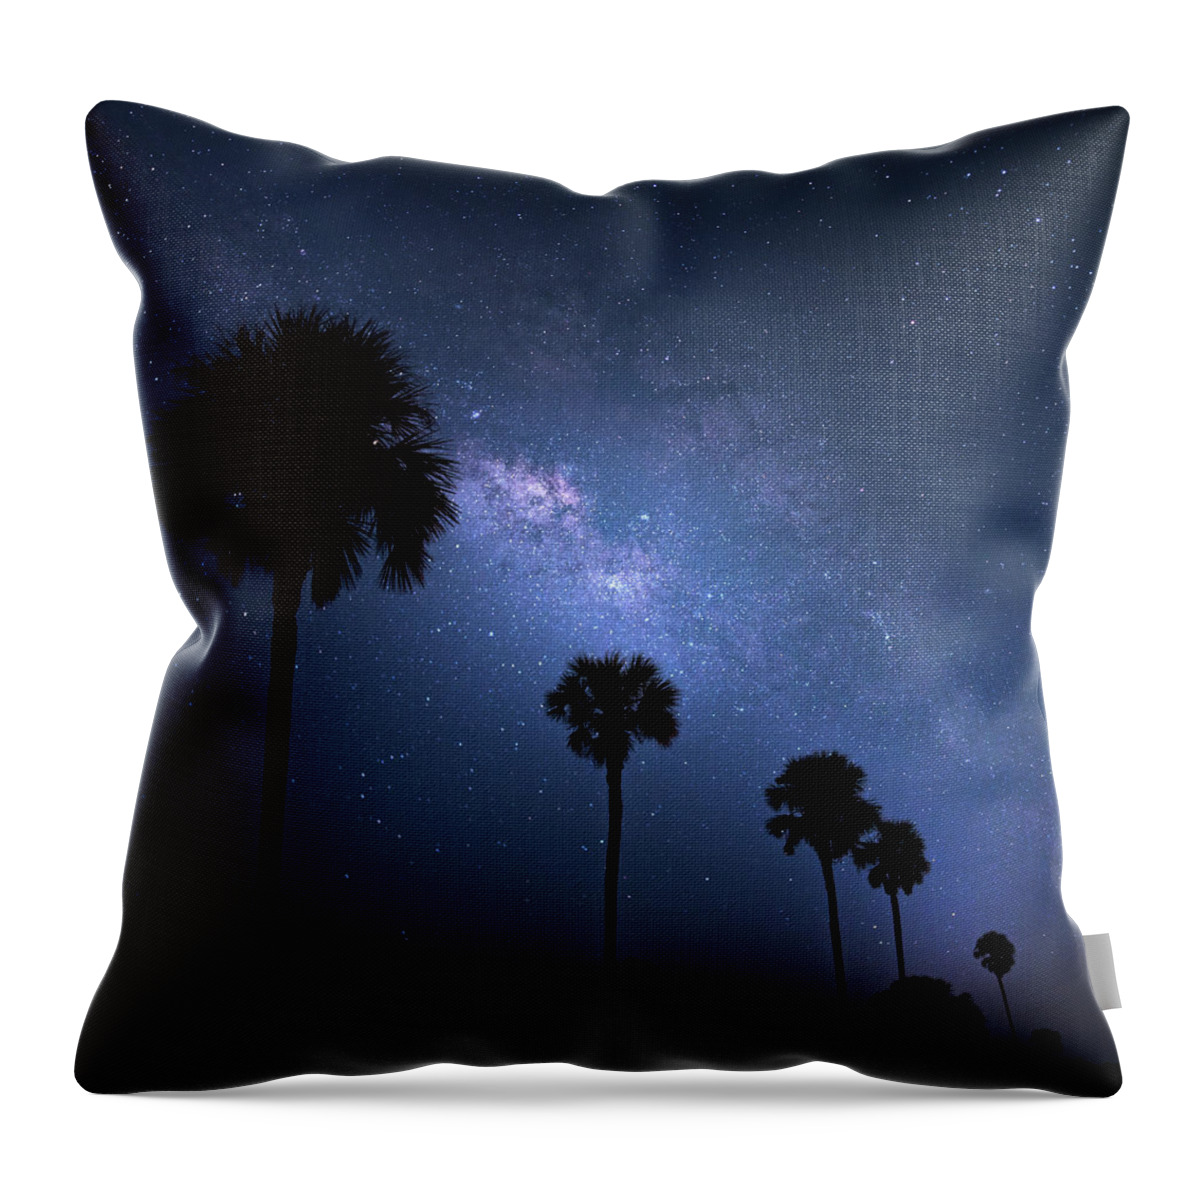 Milky Way Throw Pillow featuring the photograph Milky Way Squared by Mark Andrew Thomas